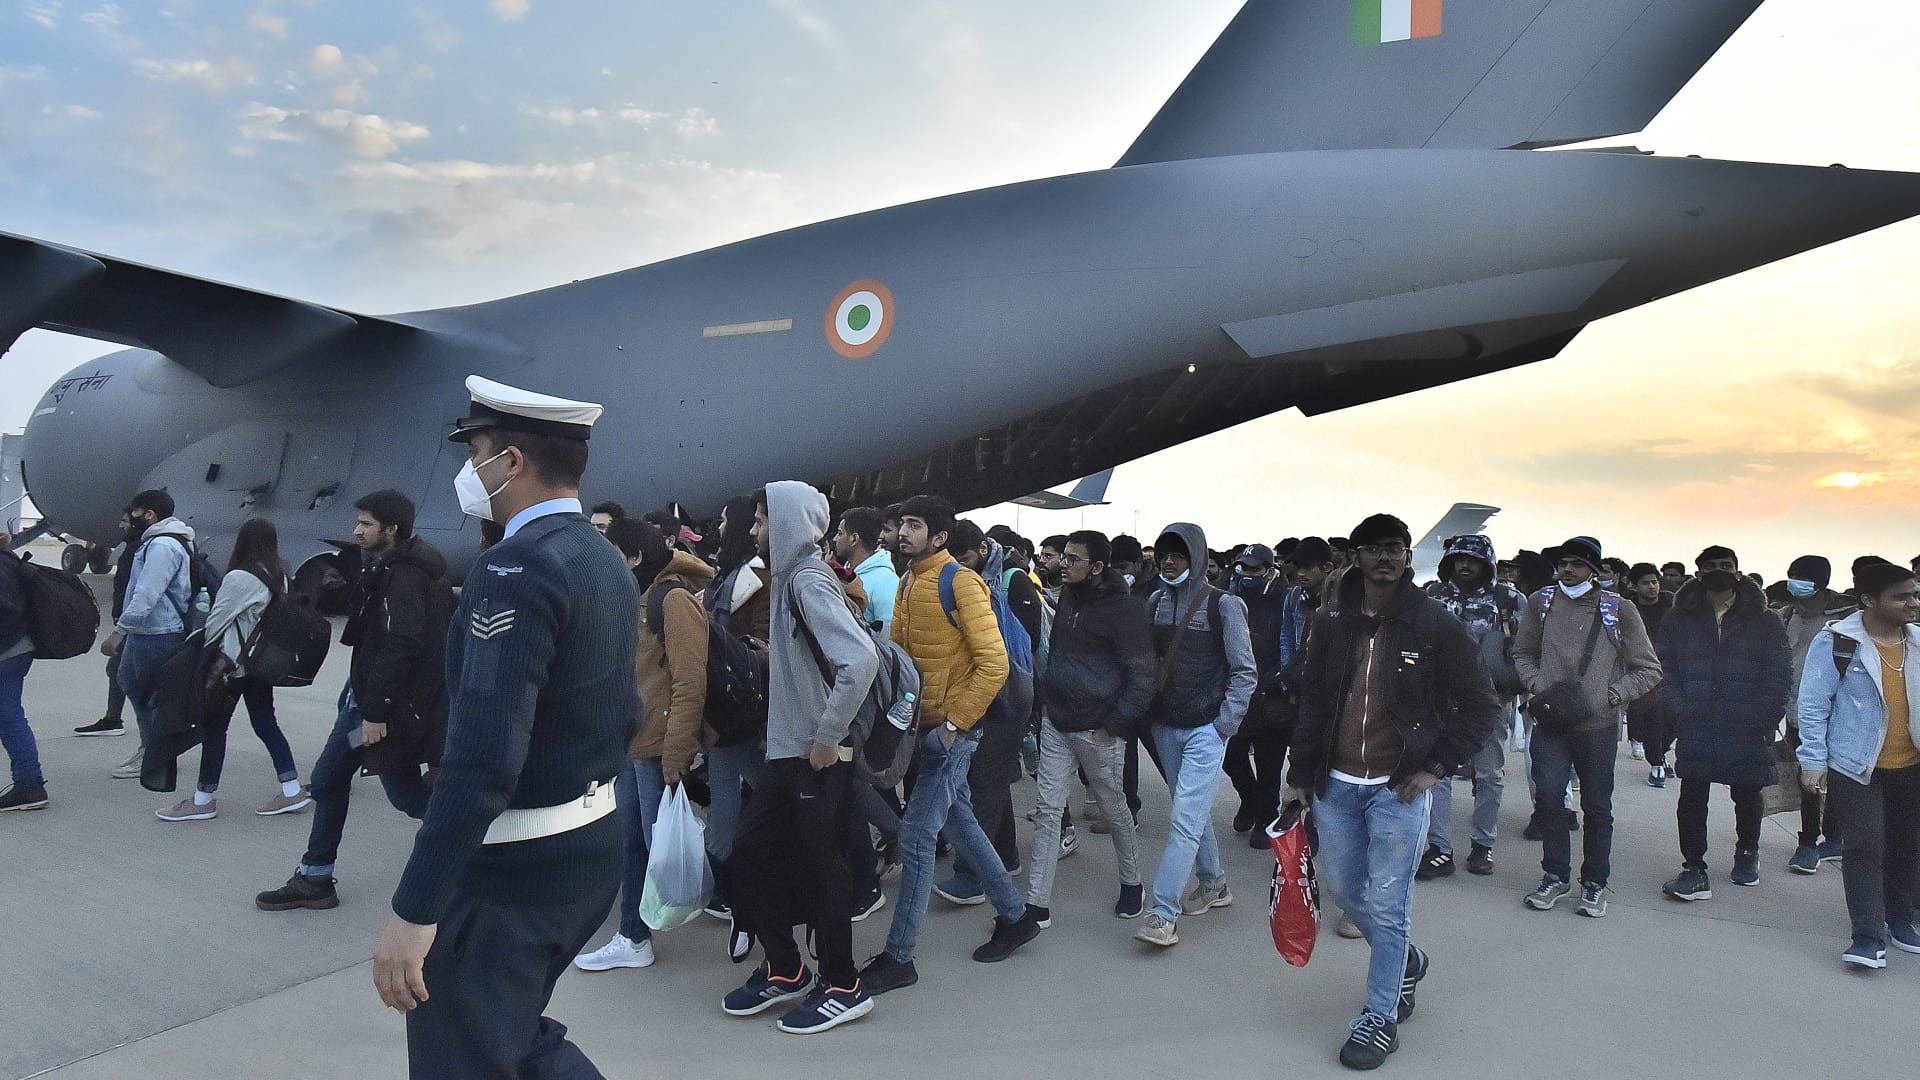 Indian Air forceaircraft, C-17 Globemaster, brings a batch of 200 stranded Indian students in Ukraine, at Hindon Air Force Station, on March 3, 2022 in New Delhi, India. 